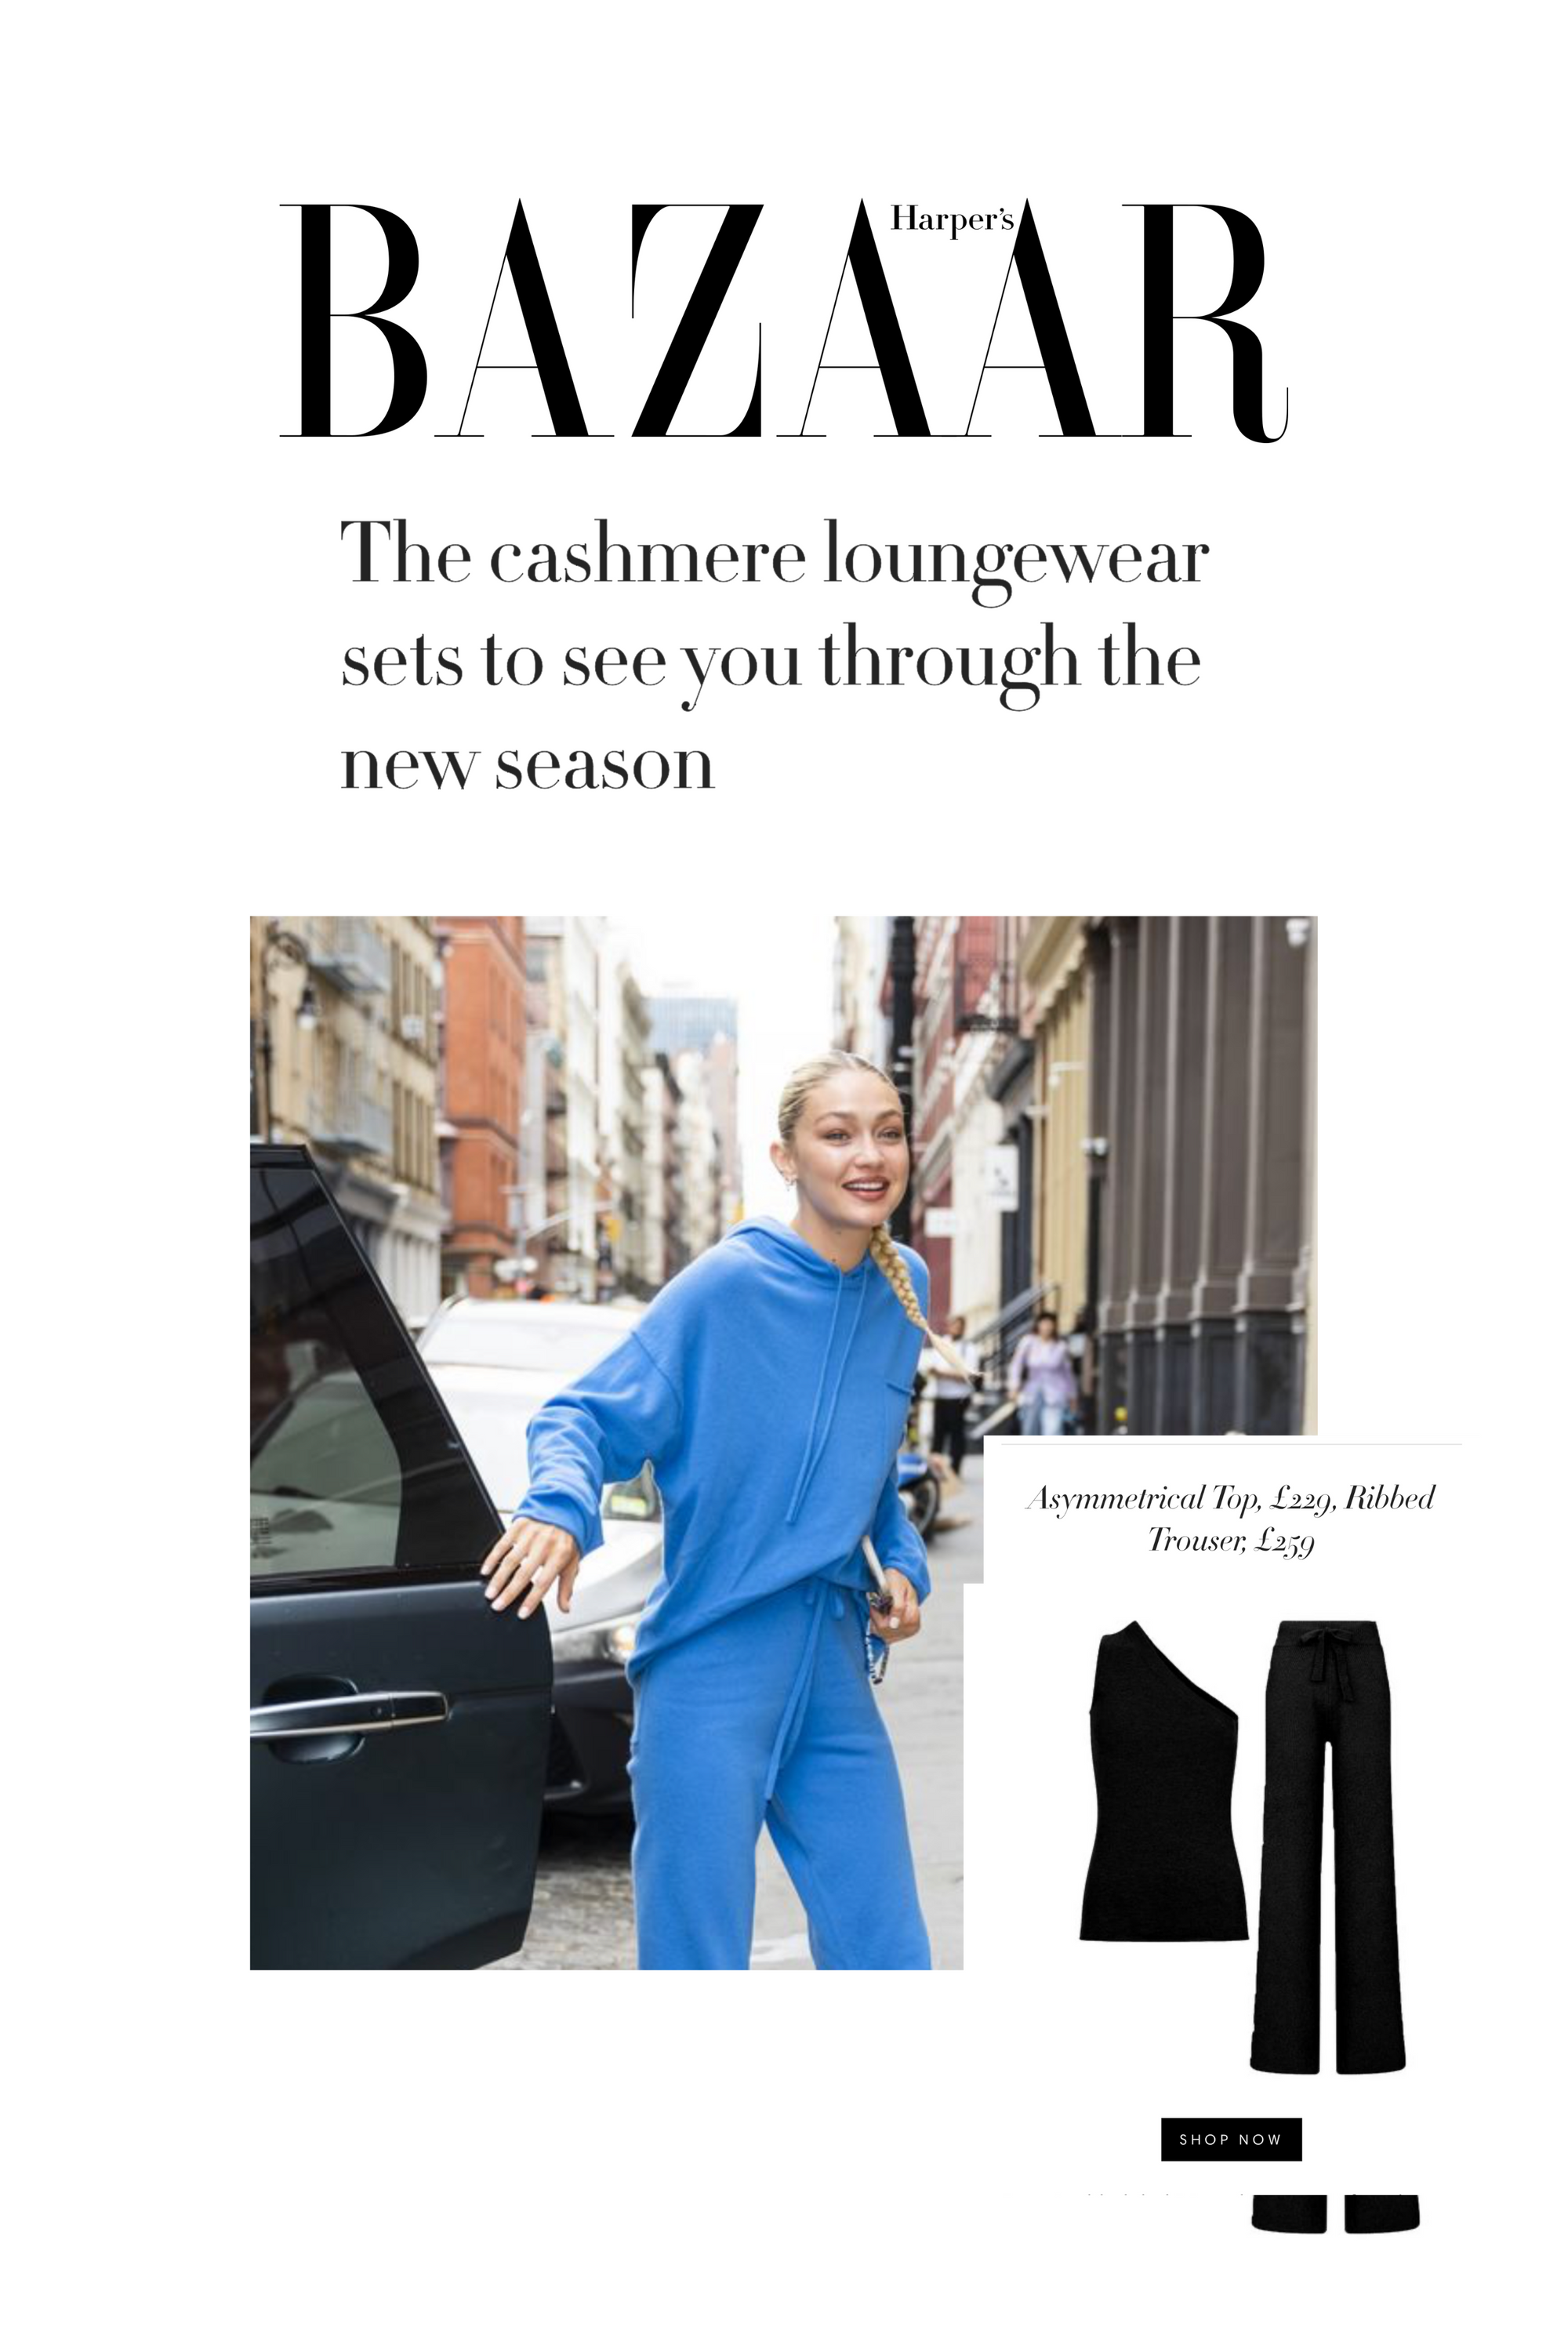 HARPERS BAZAAR | The cashmere loungewear sets to see you through the new season